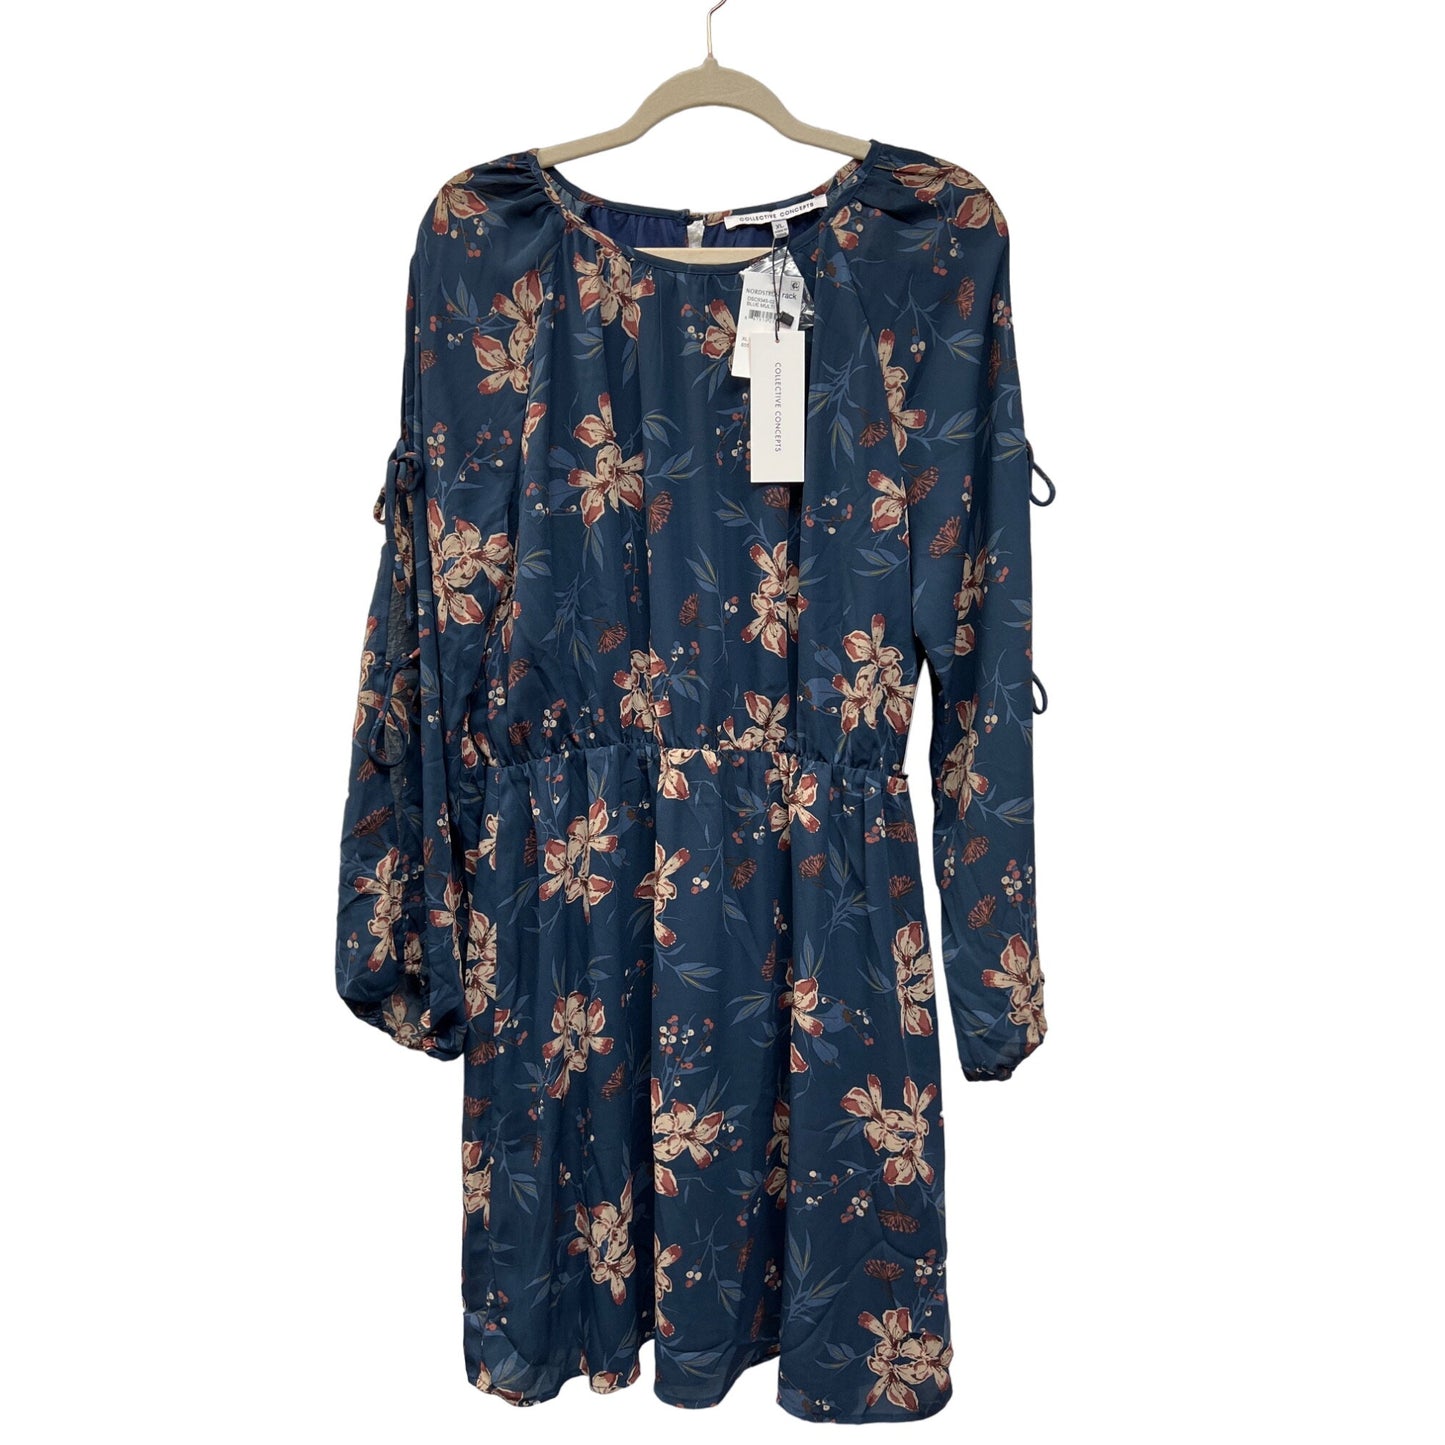 Collective Concepts NWT Floral Dress